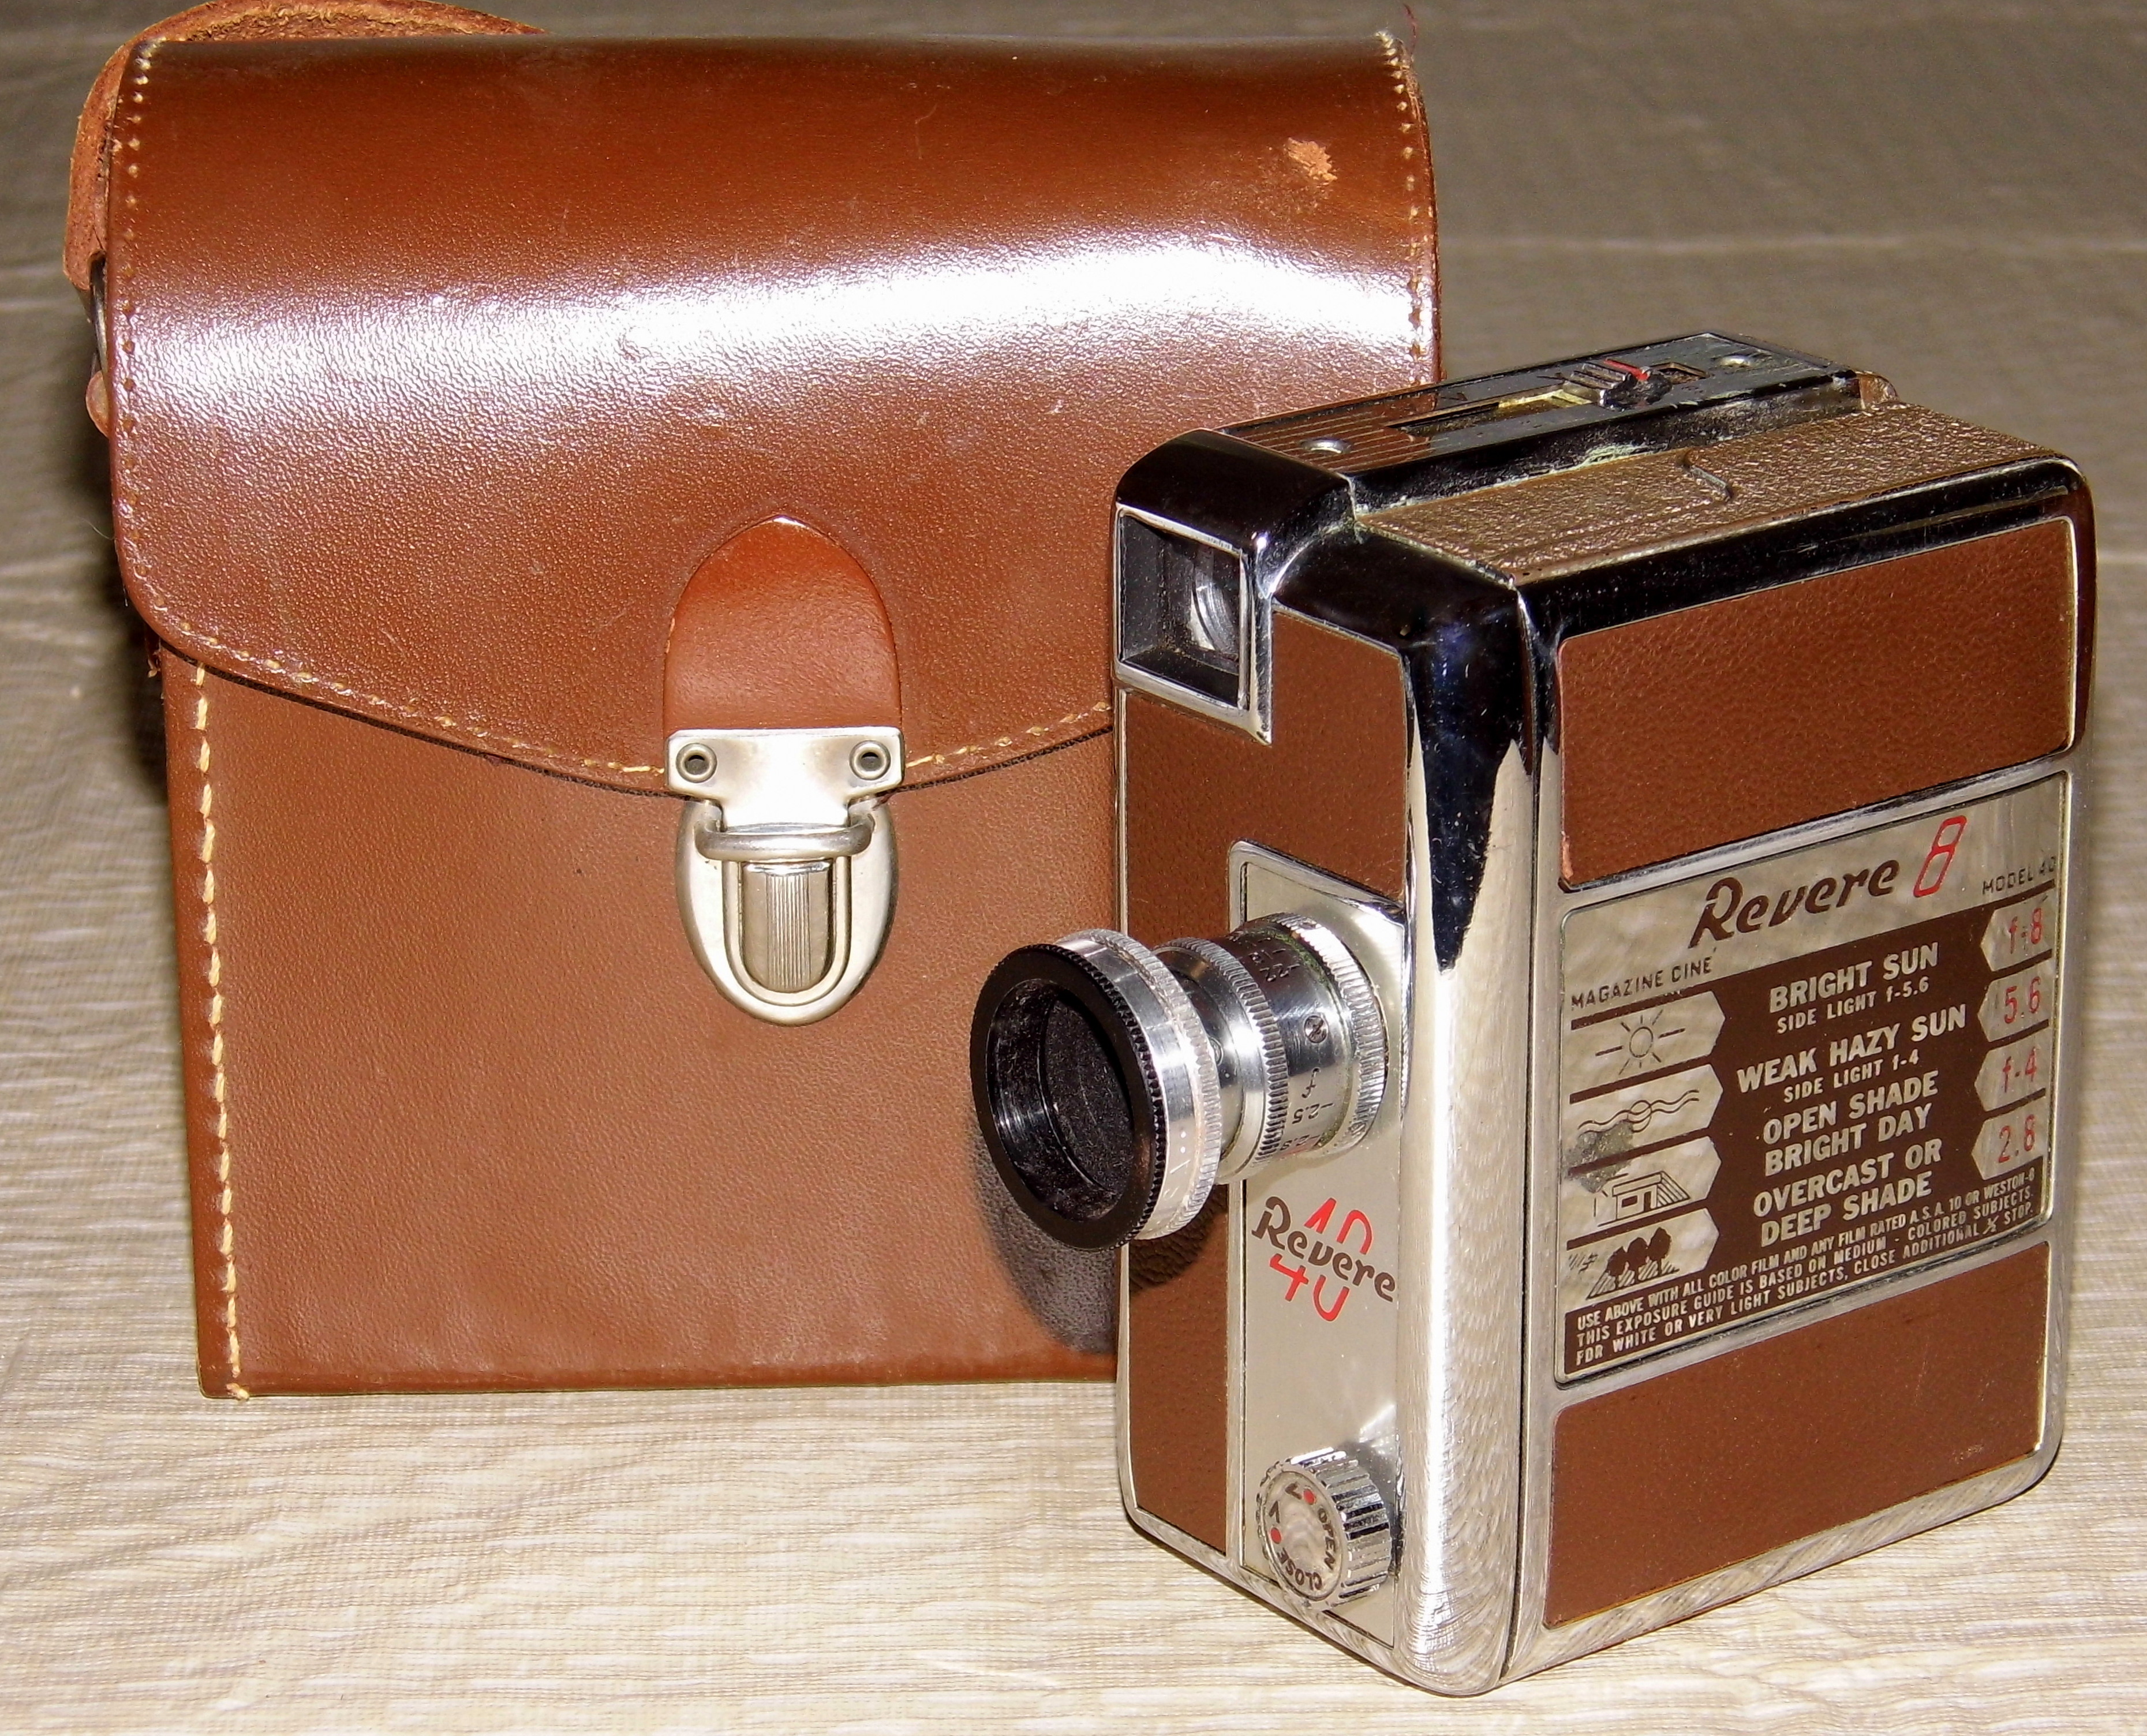 Vintage Revere 8mm Movie Camera, Model 40, Magazine Load, Made In USA, A Compact And Well-Built Camera, Circa 1951 (13292295625)